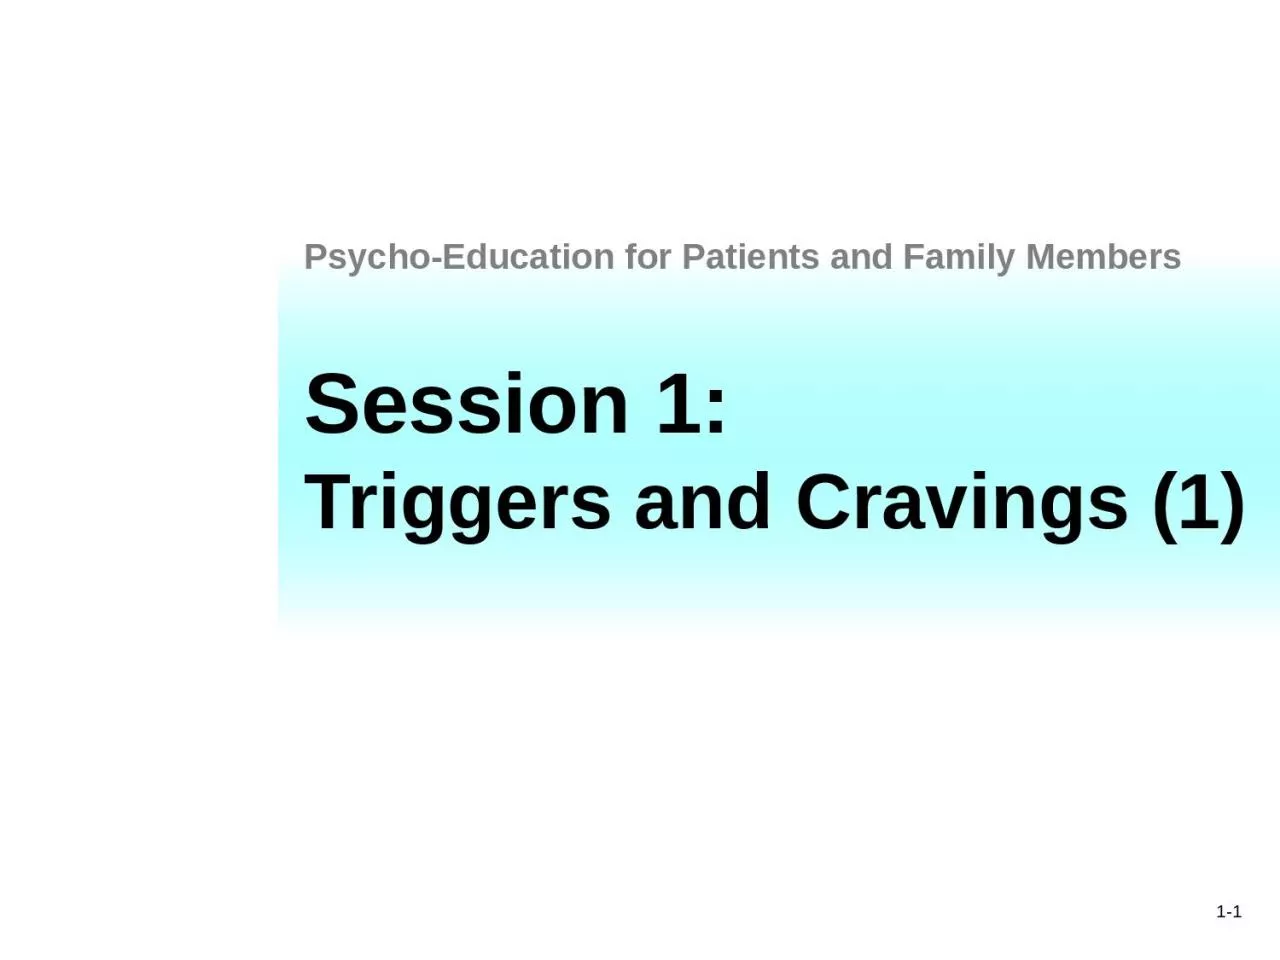 Session 1: Triggers and Cravings